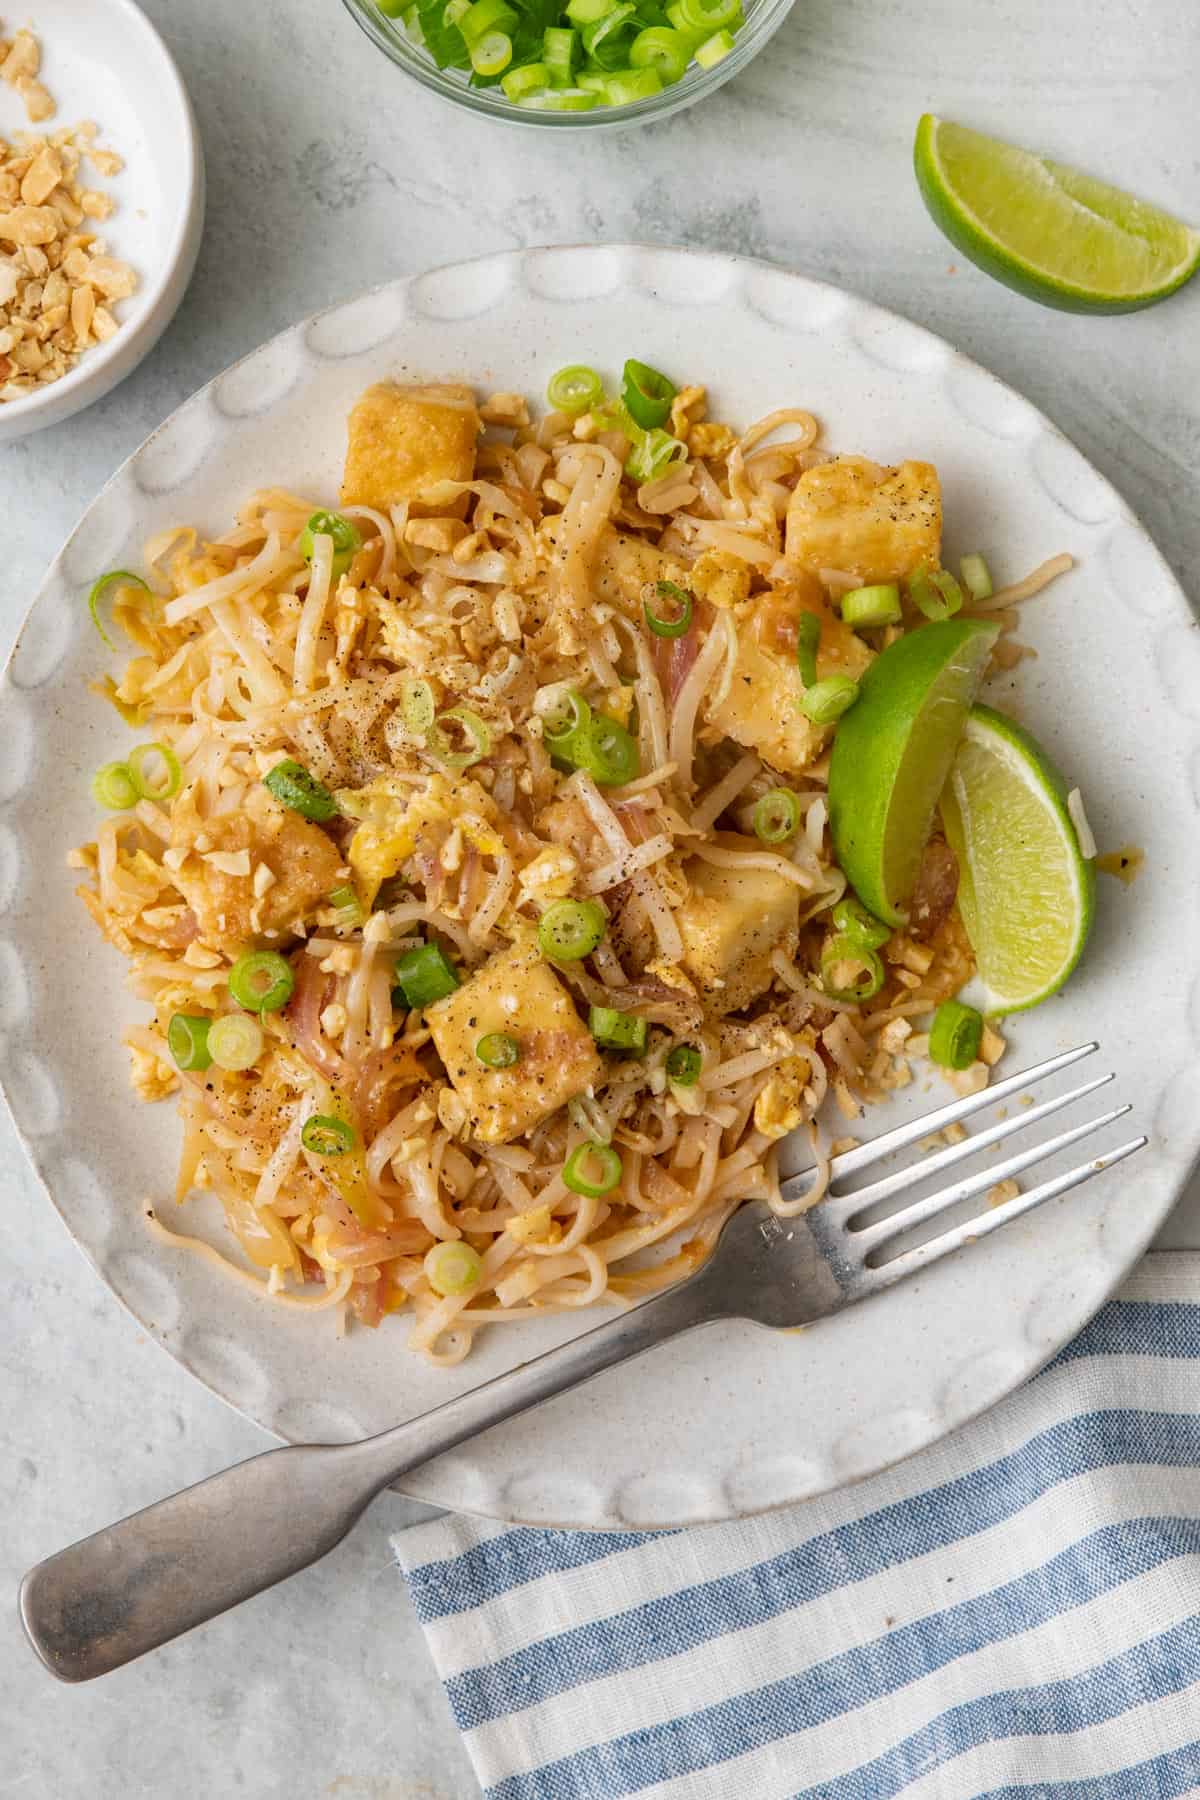 Vegetarian pad Thai with tofu cubes on a plate, garnished with green onions and lemon wedges.